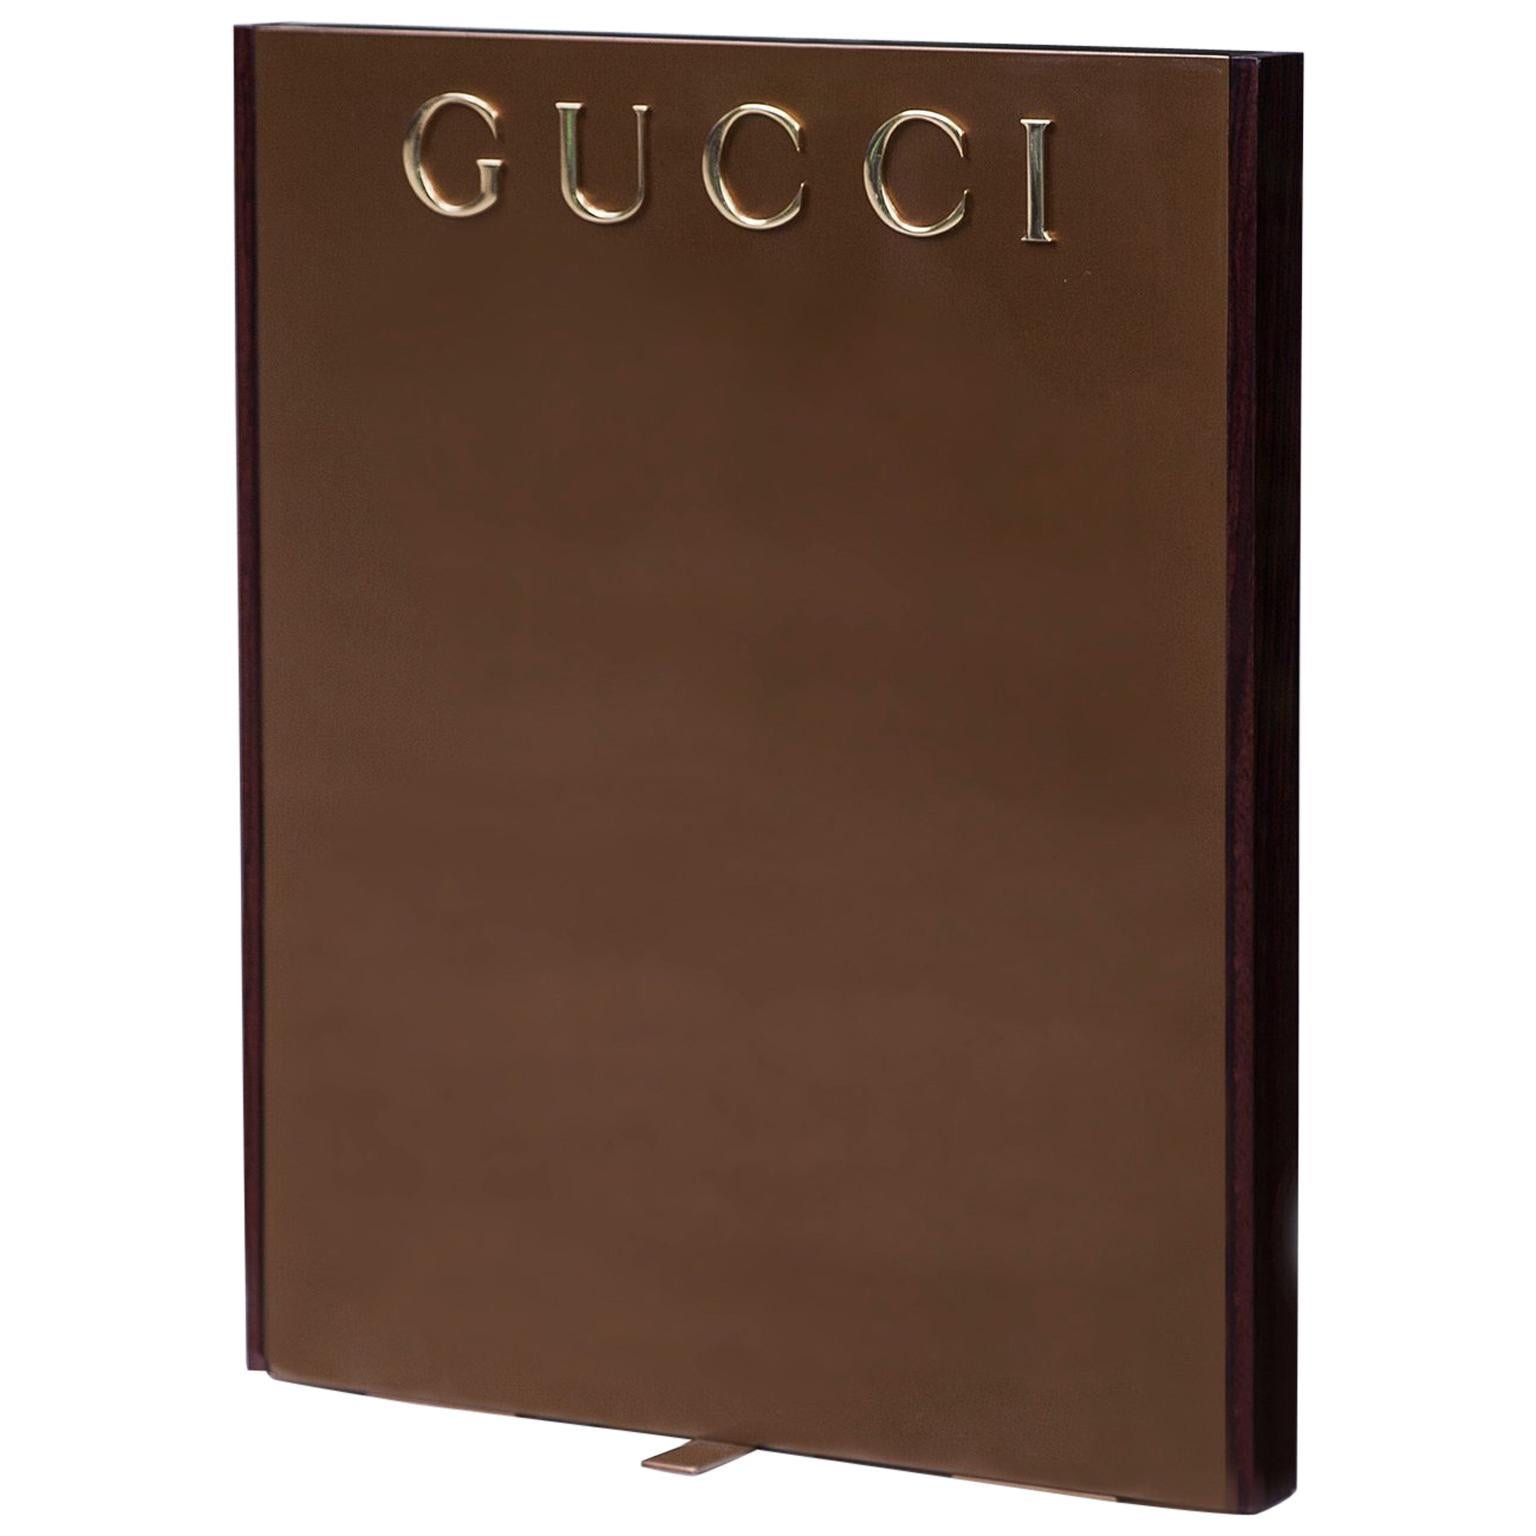 Huge Gucci Advertising Display Stand